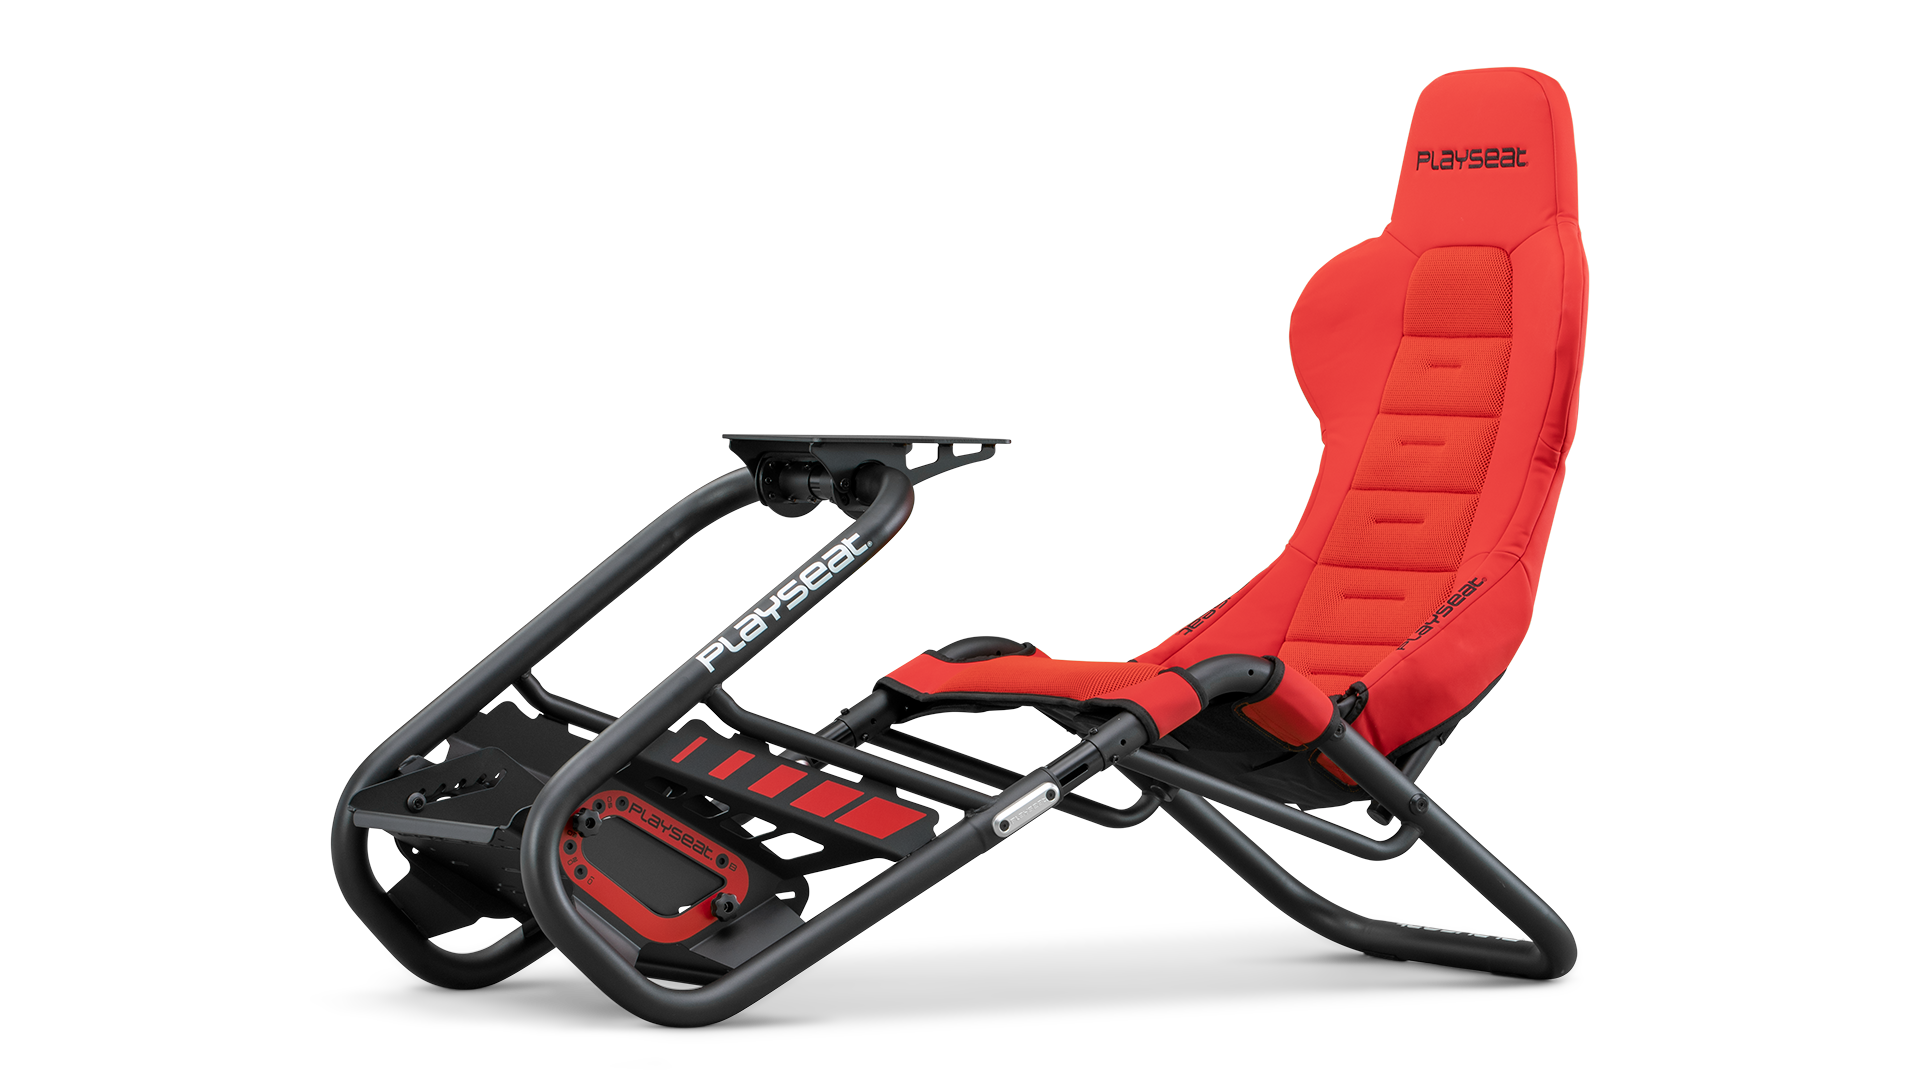 playseat-trophy-red-direct-drive-simulator-front-angle-view-1920x1080-6.png